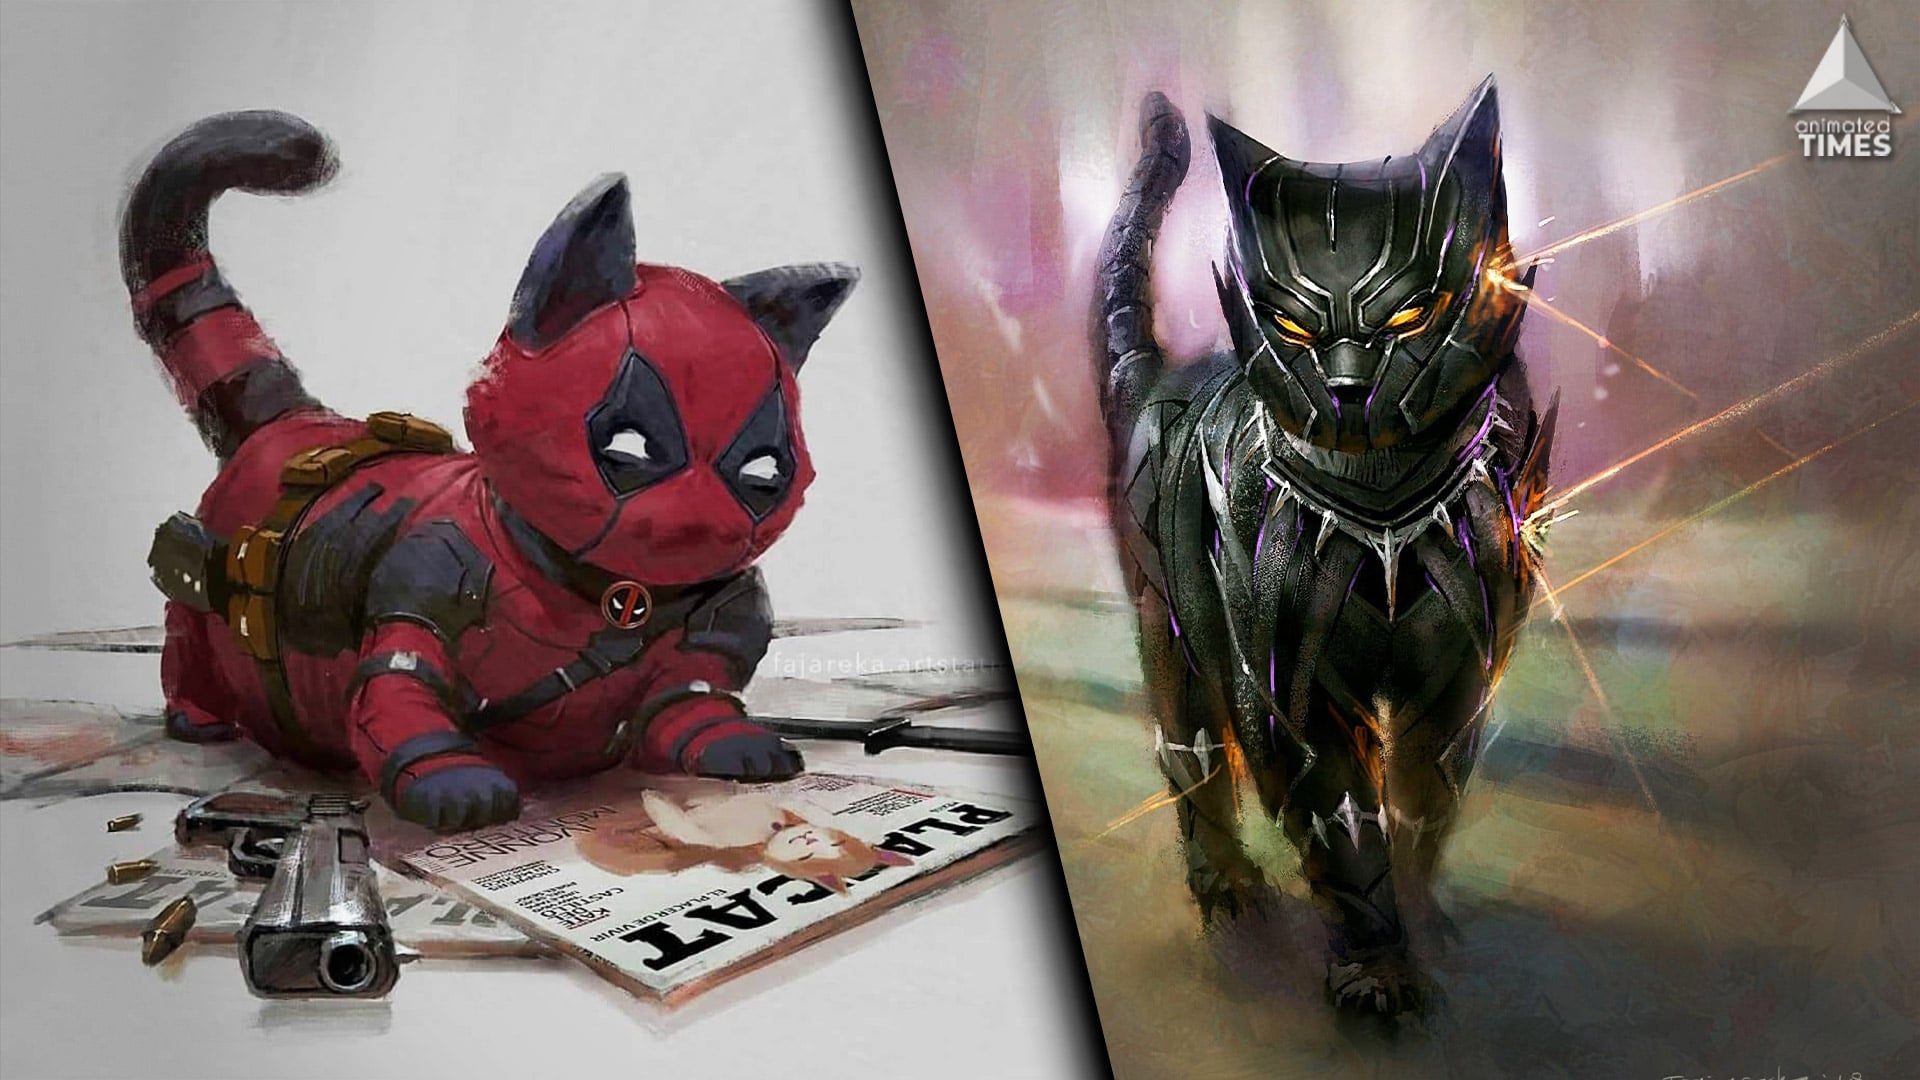 Cats Re-imagined As Popular Marvel Superheroes